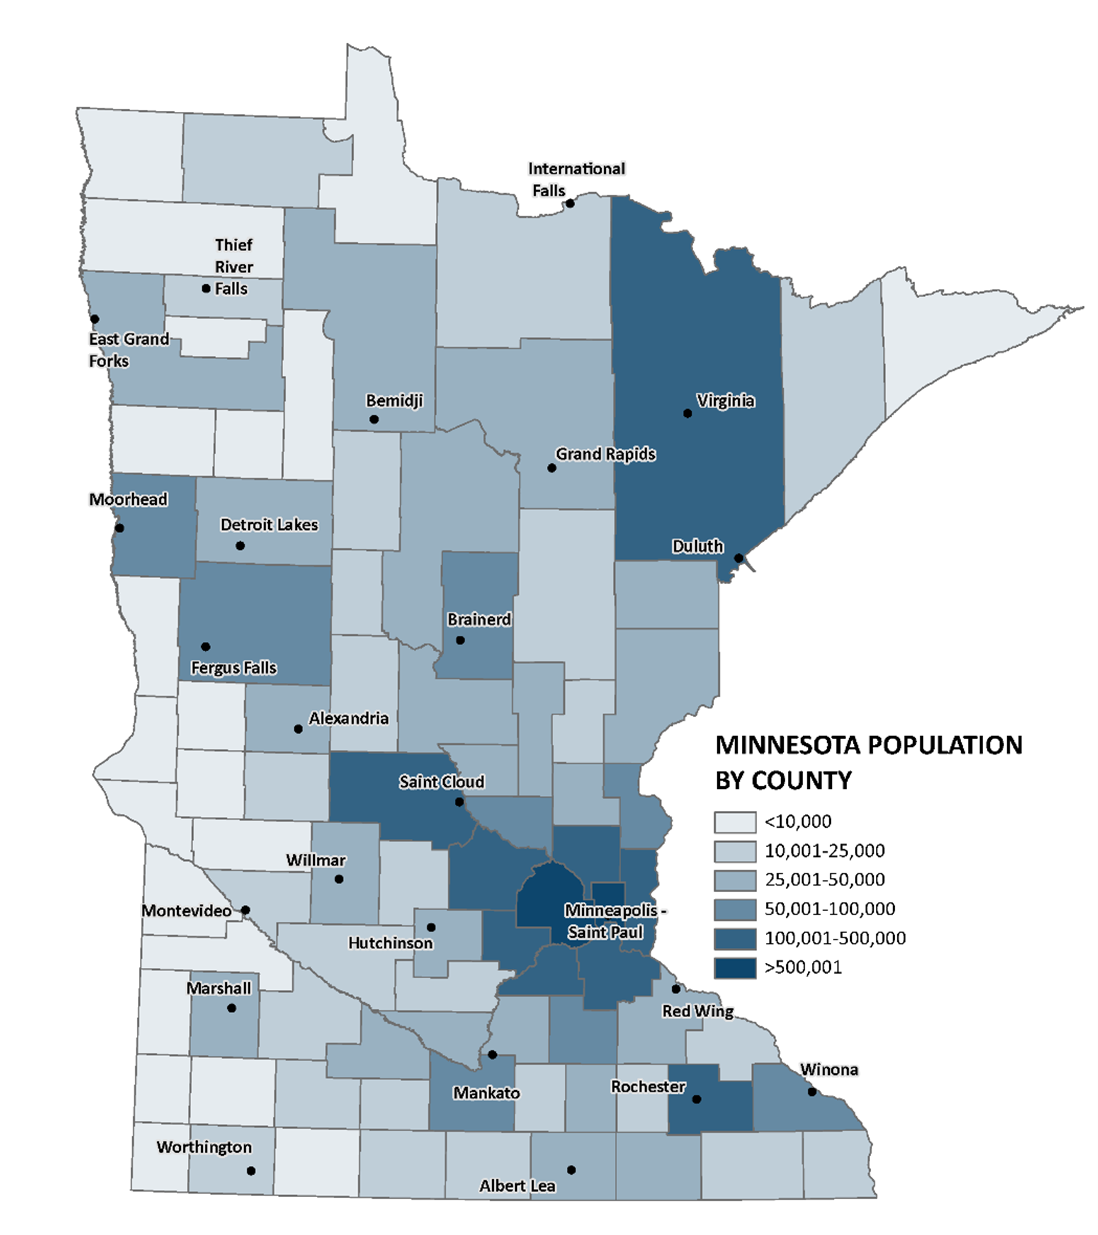 Minnesota map that shows total population by county in 2019. The counties with the most population are located in the seven-county metro area, in the Rochester and Mankato areas, as well as along the Interstate-94 corridor toward the Fargo-Moorhead area. Most of these counties have populations over 50,000 people. 